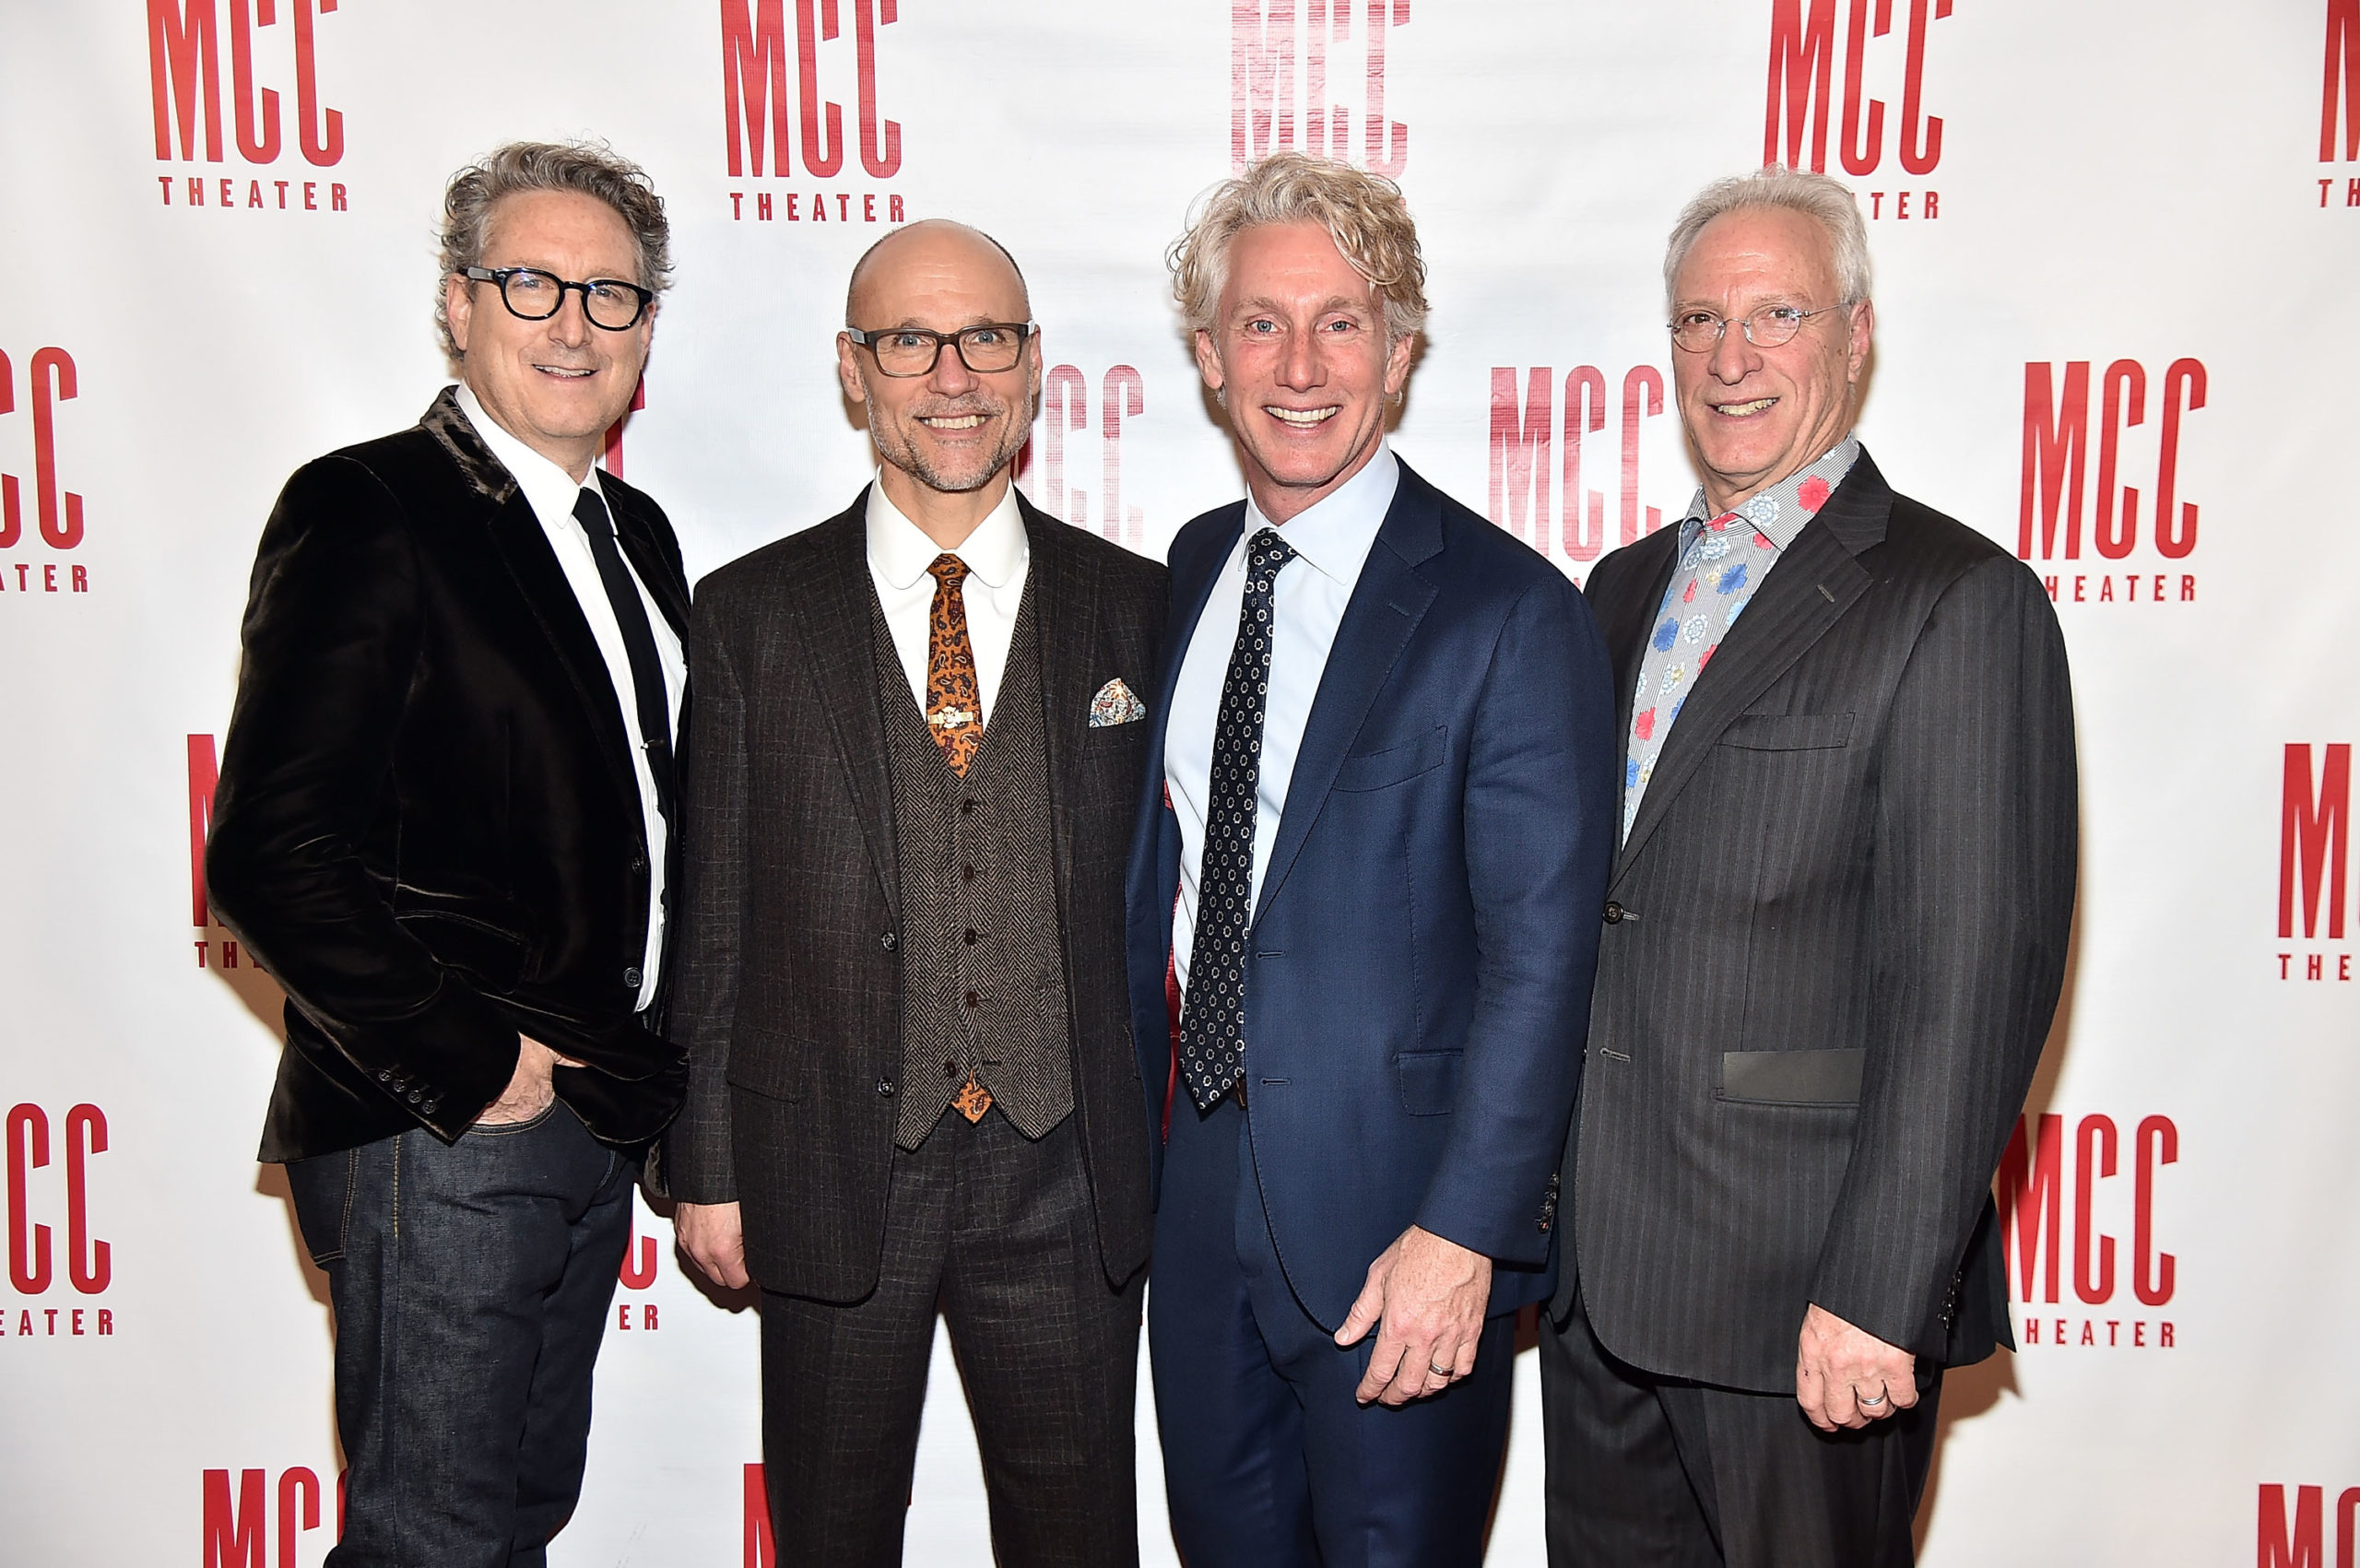 NEW YORK, NY - MARCH 26: Bernard Telsey, William Cantler, Blake West and Robert LuPone attend Miscast 2018 Honors Laurie 